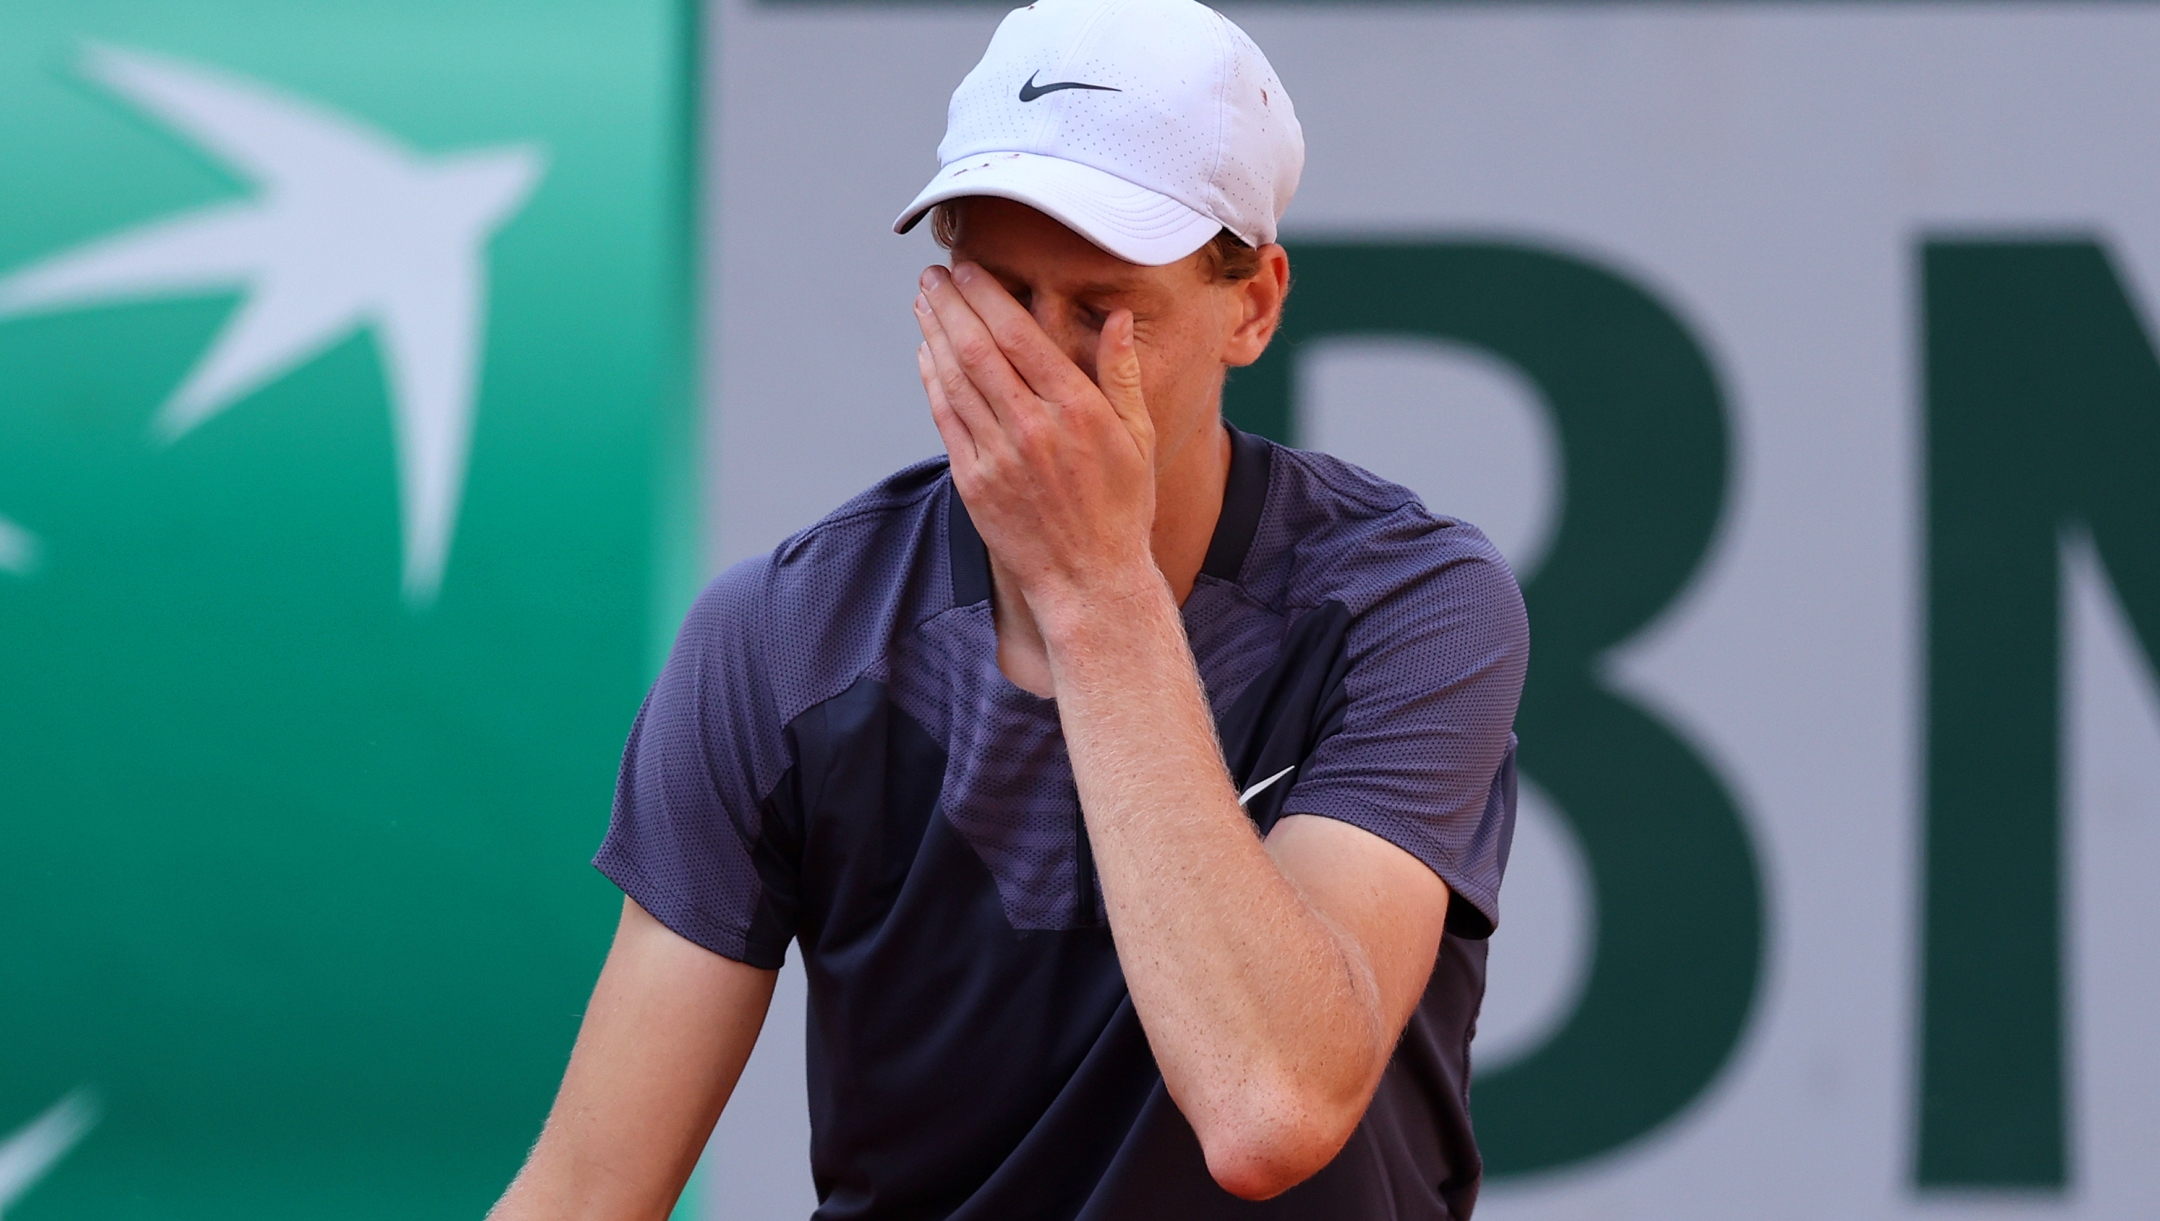 PARIS, FRANCE - JUNE 01: Jannik Sinner of Italy reacts against Daniel Altmaier of Germany during the Men's Singles Second Round match on Day Five of the 2023 French Open at Roland Garros on June 01, 2023 in Paris, France. (Photo by Julian Finney/Getty Images)